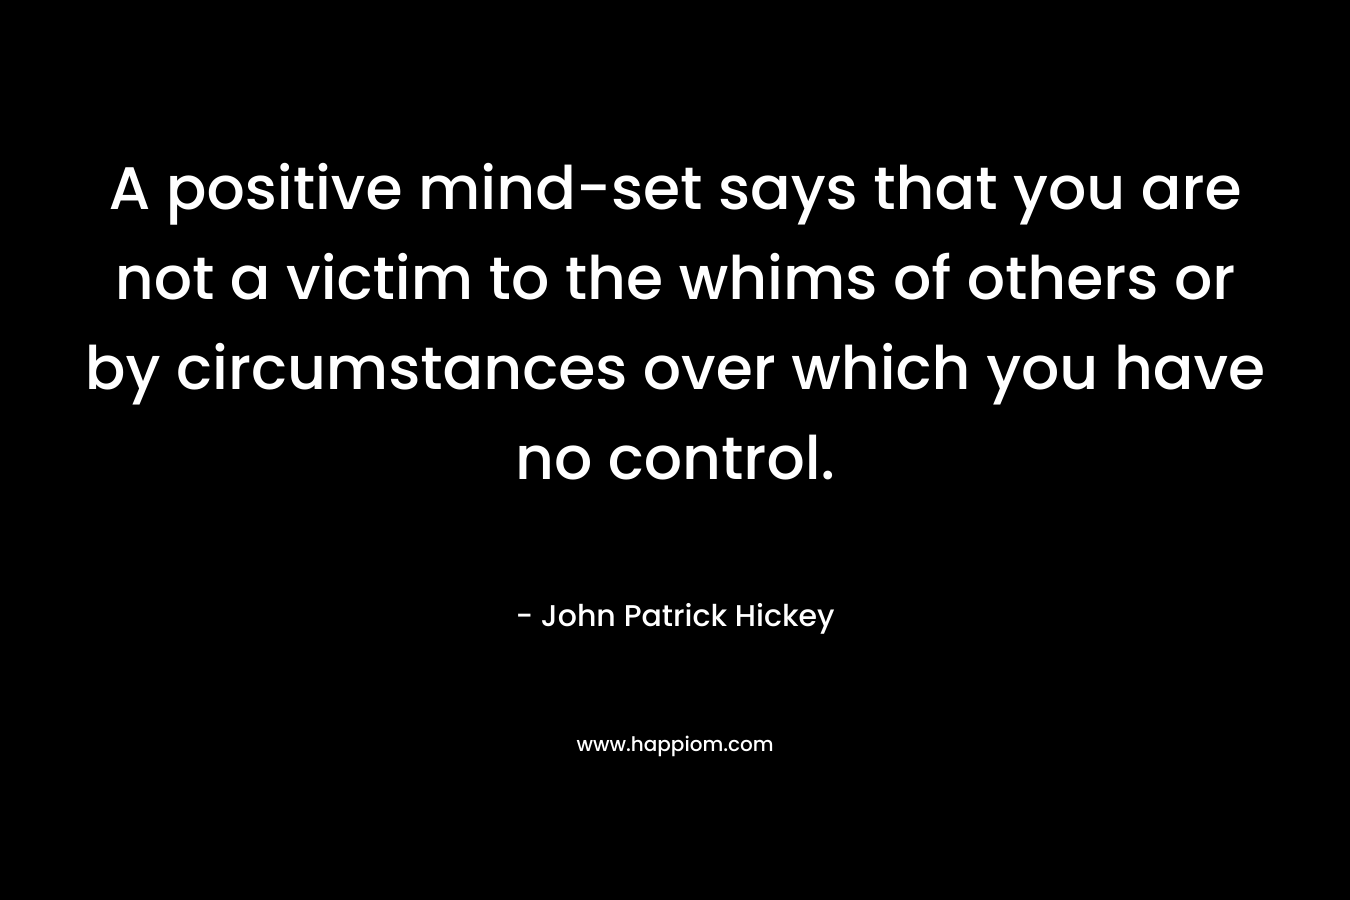 A positive mind-set says that you are not a victim to the whims of others or by circumstances over which you have no control. – John Patrick Hickey